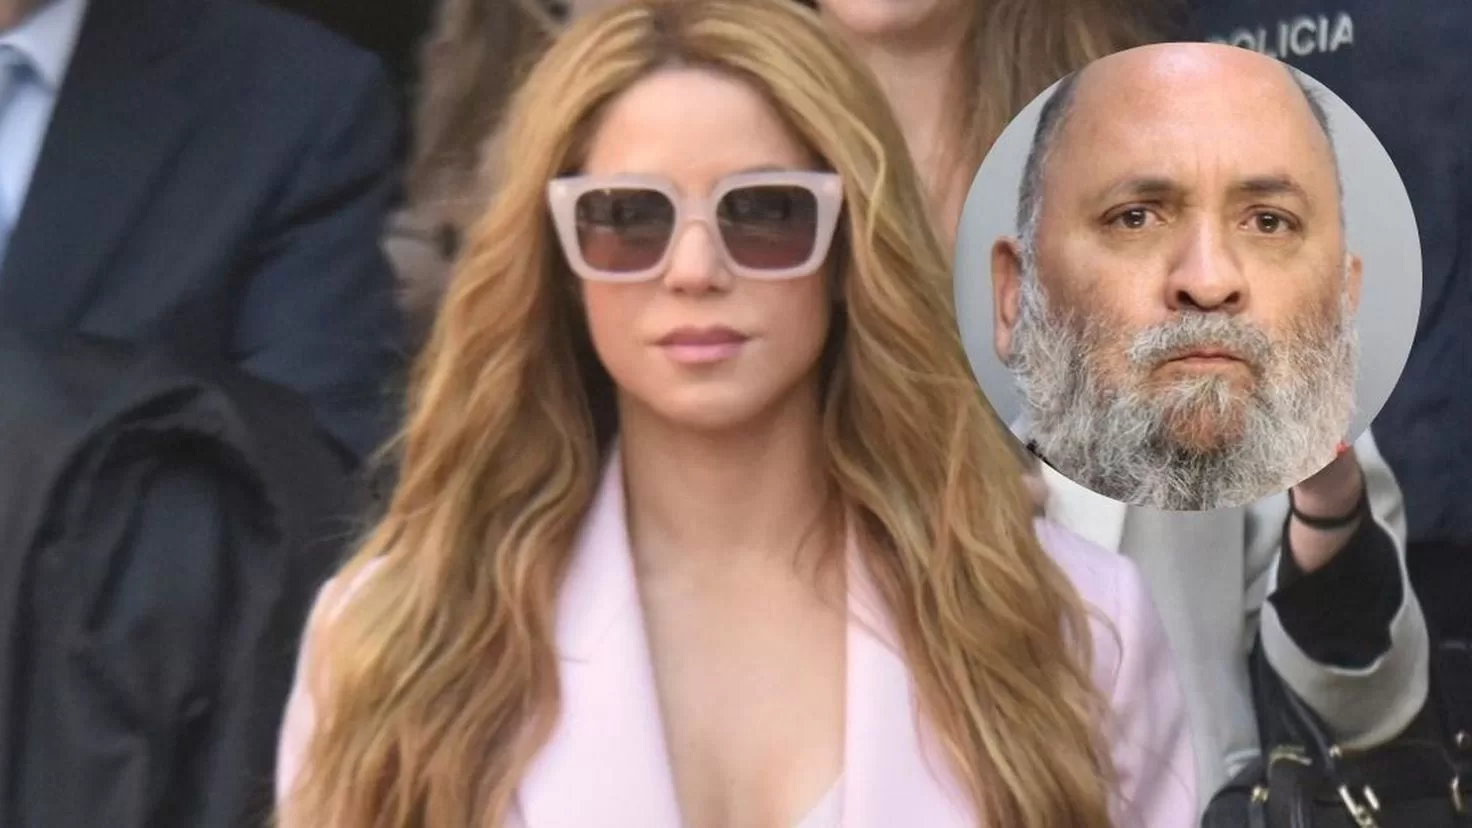 A man arrested in Miami for harassing Shakira
